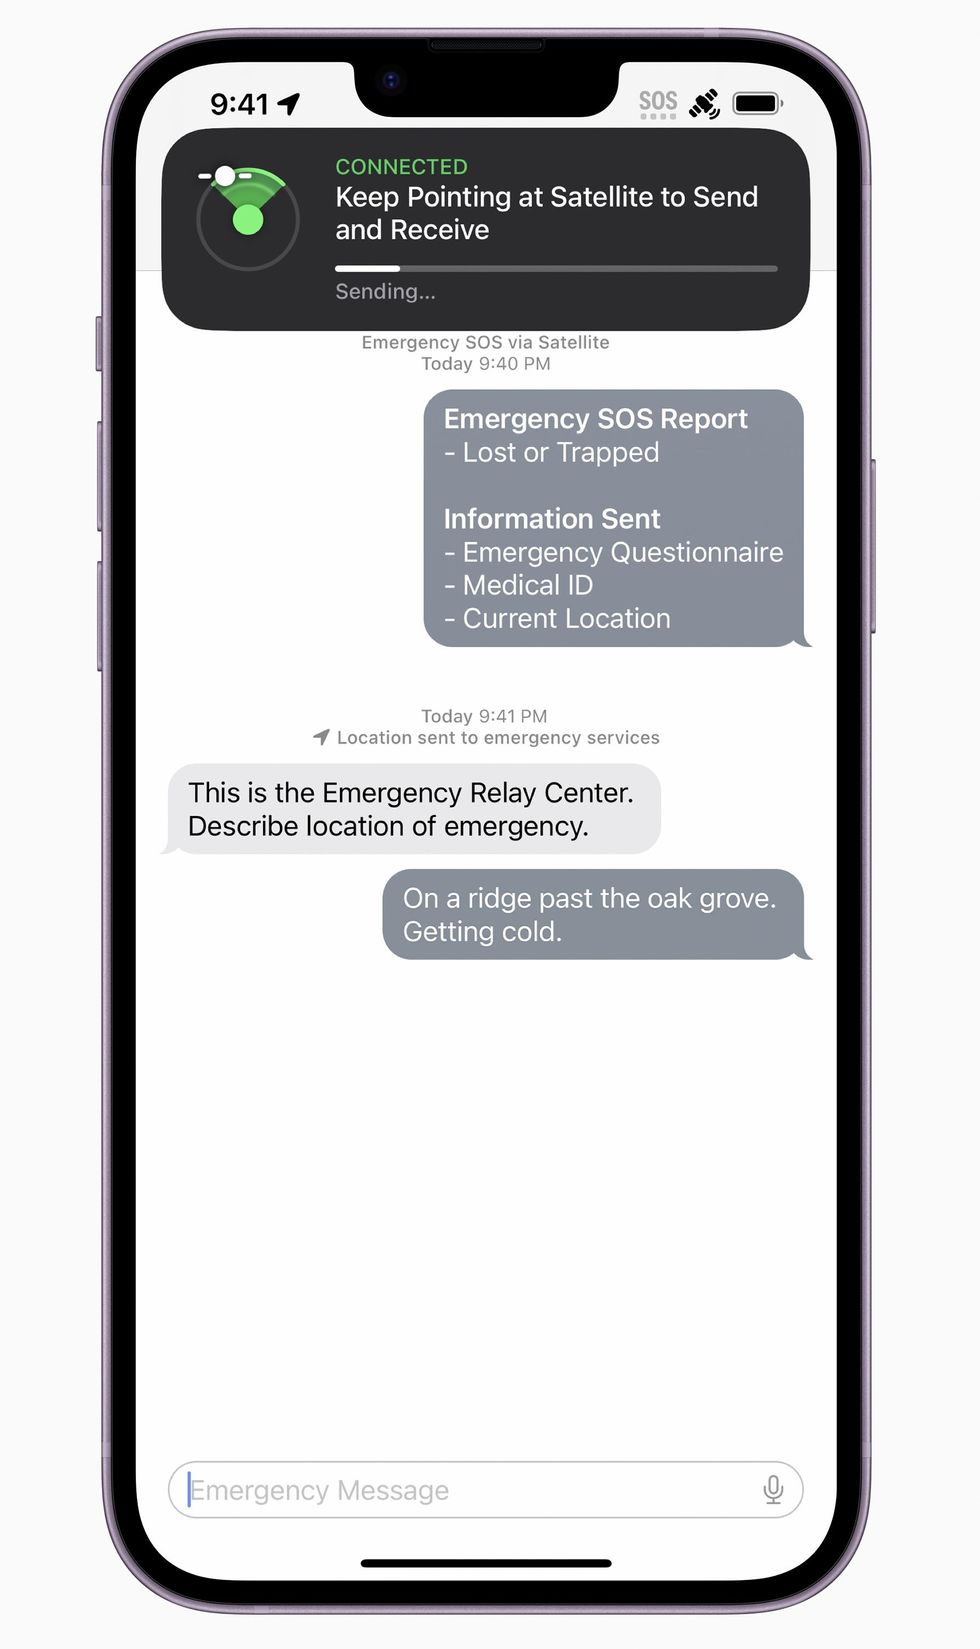 A phone screen display mockup. At the top of the screen, a black box says u201ckeep point at satellite to send and receiveu201d with a progress bar slightly filled below it. Below the box, a text message exchange gives more detailed instructions on how to use the service.